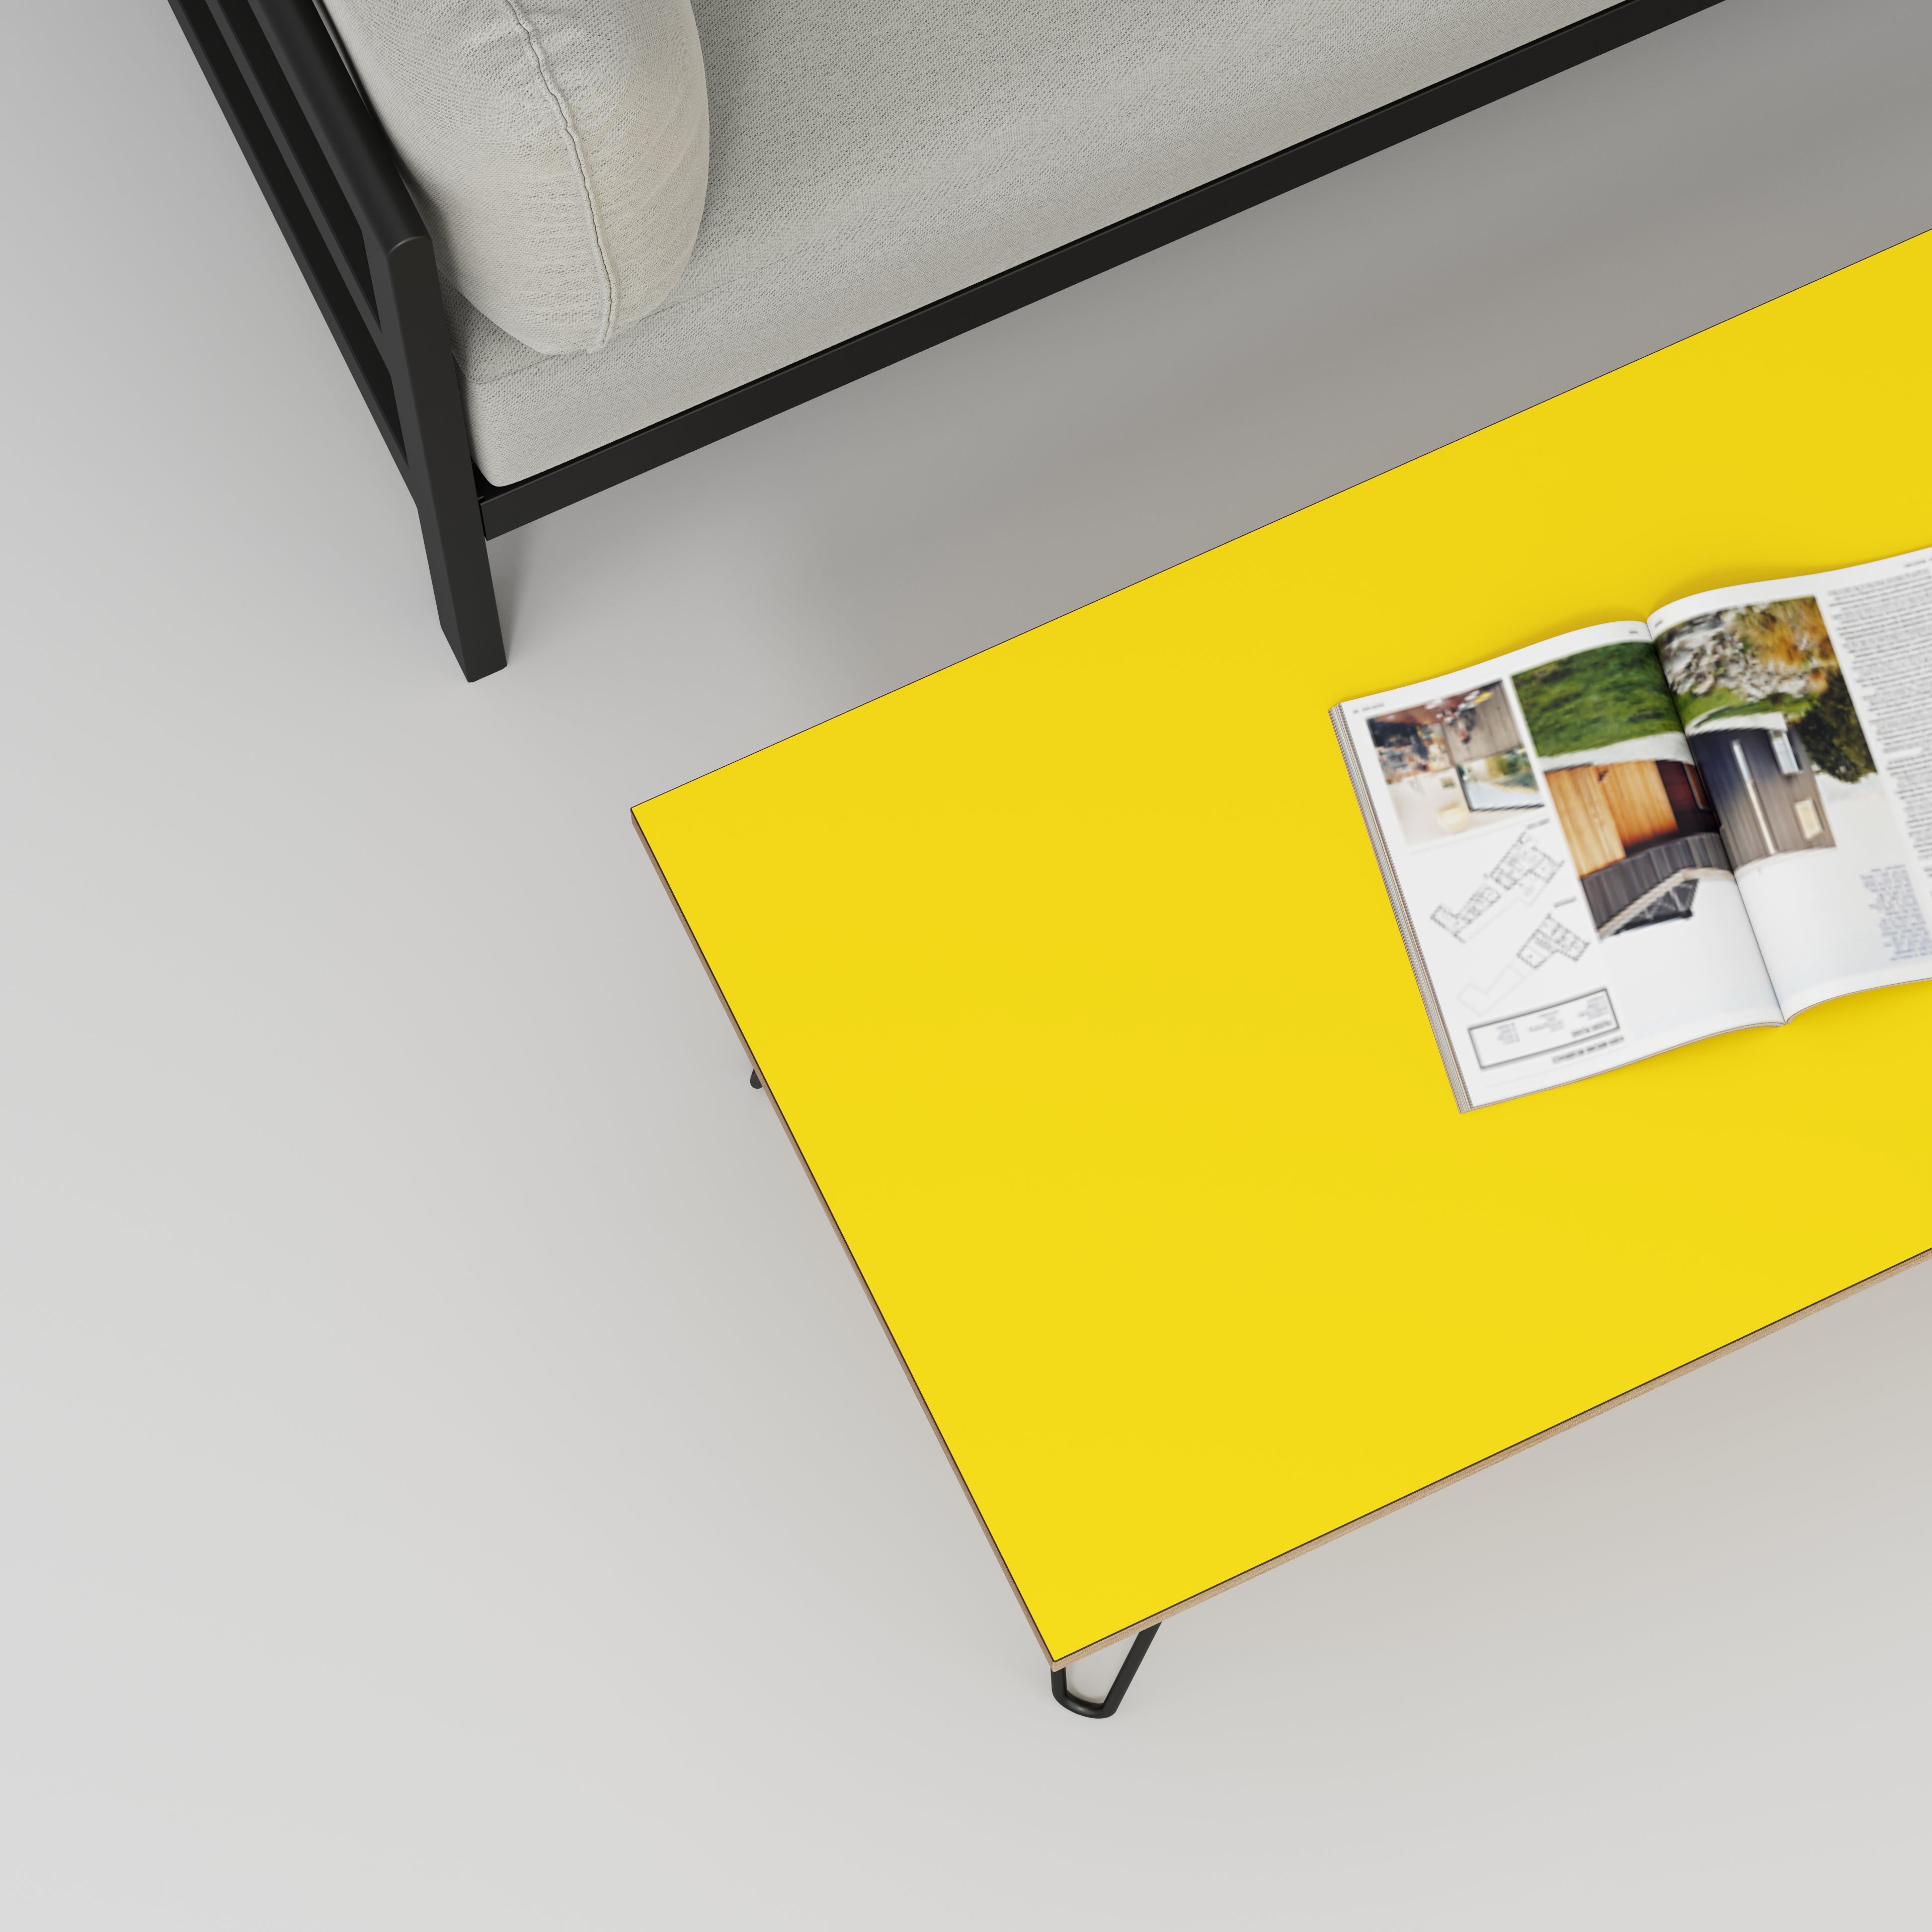 Coffee Table with Black Hairpin Legs - Formica Chrome Yellow - 1200(w) x 600(d) x 425(h)